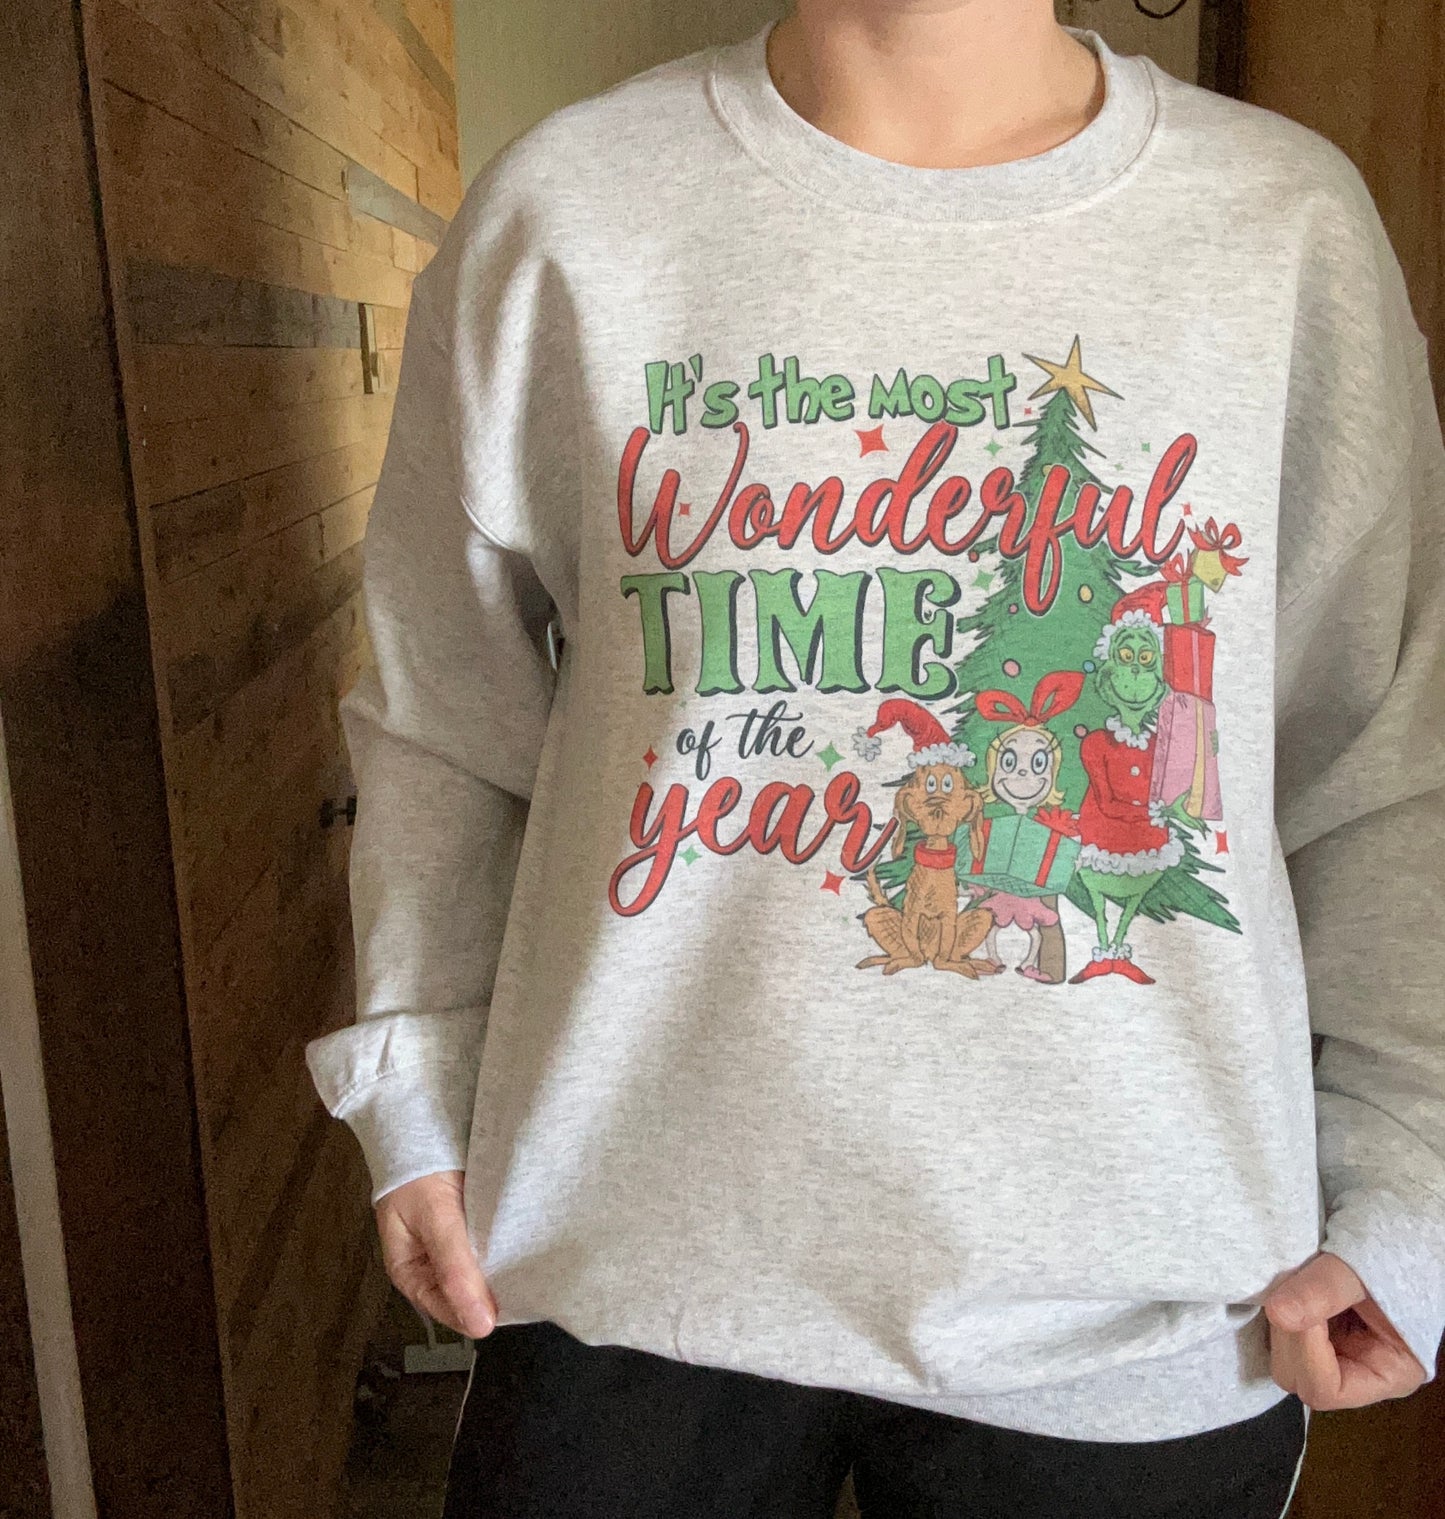 Most Wonderful Time of the Year - Vintage Grinch Crew - Adult Christmas Crewneck